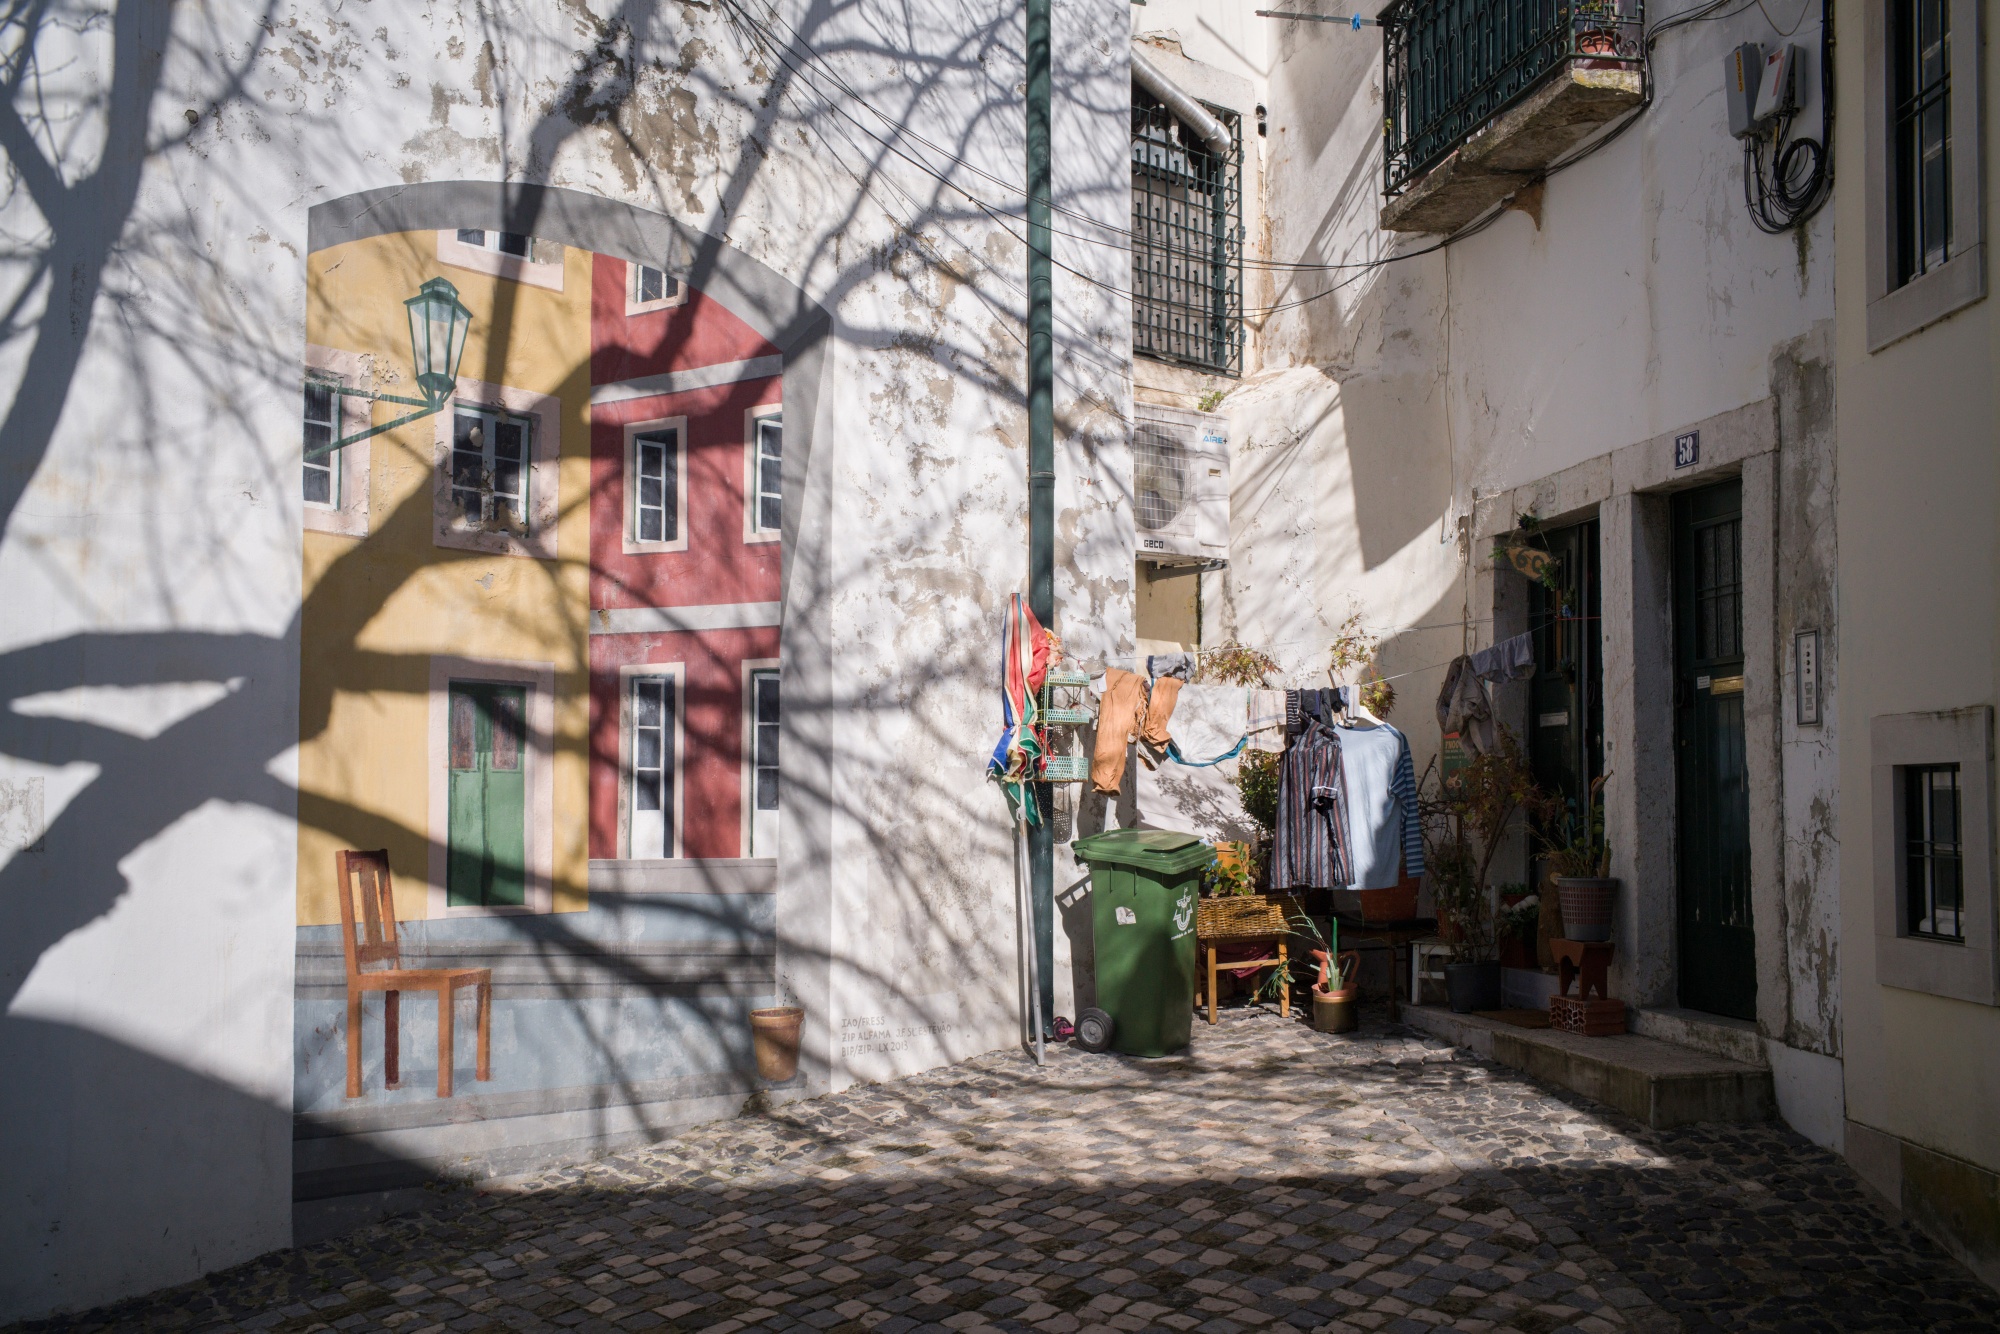 Runaway Property Costs Push Portugal to End Golden Visas